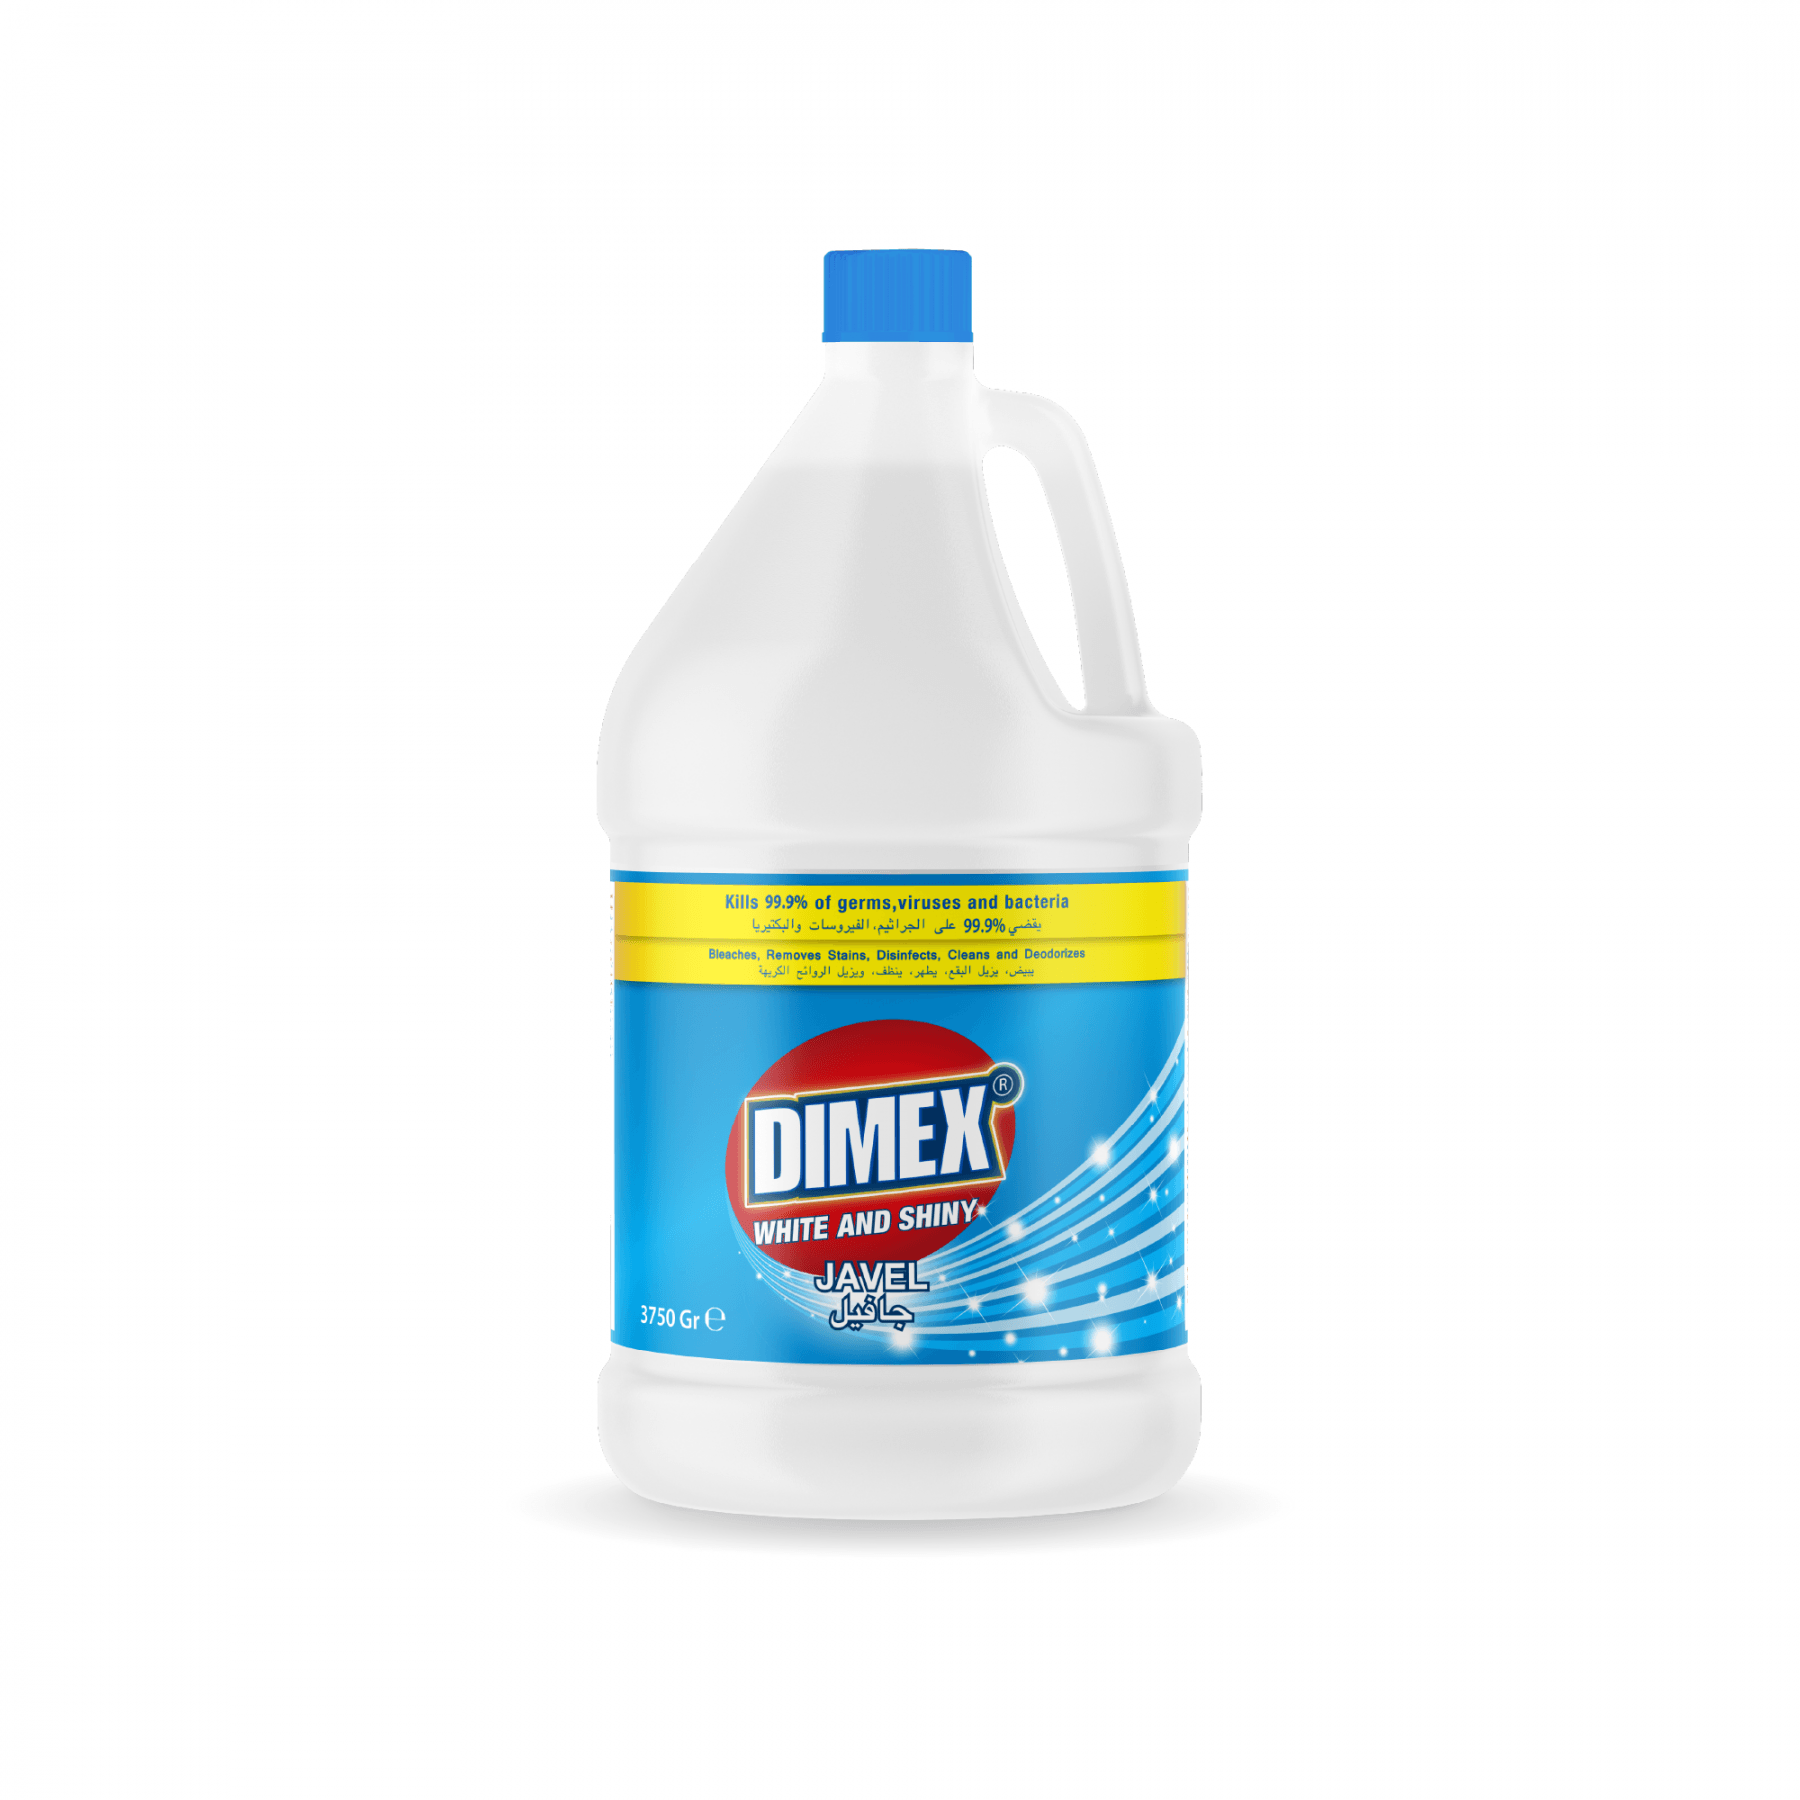 Dimex Bleach 3.75L - Karout Online -Karout Online Shopping In lebanon - Karout Express Delivery 